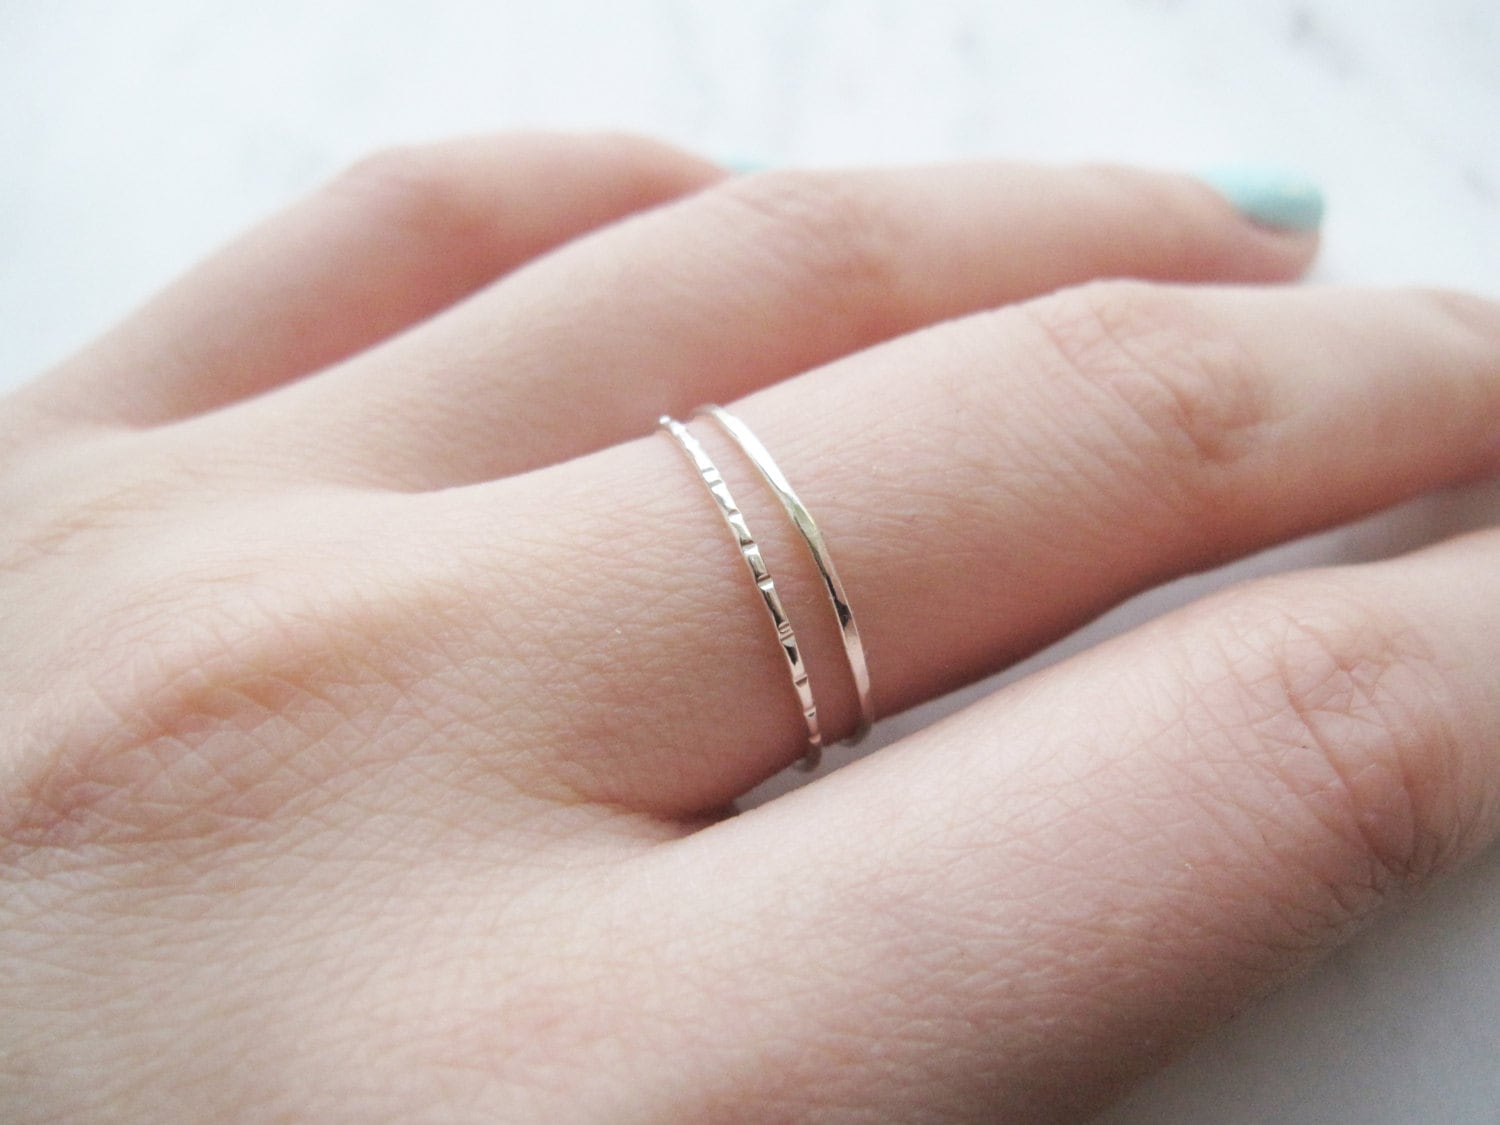 Buy Tiny Ring 1.2 Mm Width, Unique Stackable Ring, Elegant Tiny Ring, Thin  Band Ring in 925 Sterling Silver. real Silver Online in India - Etsy